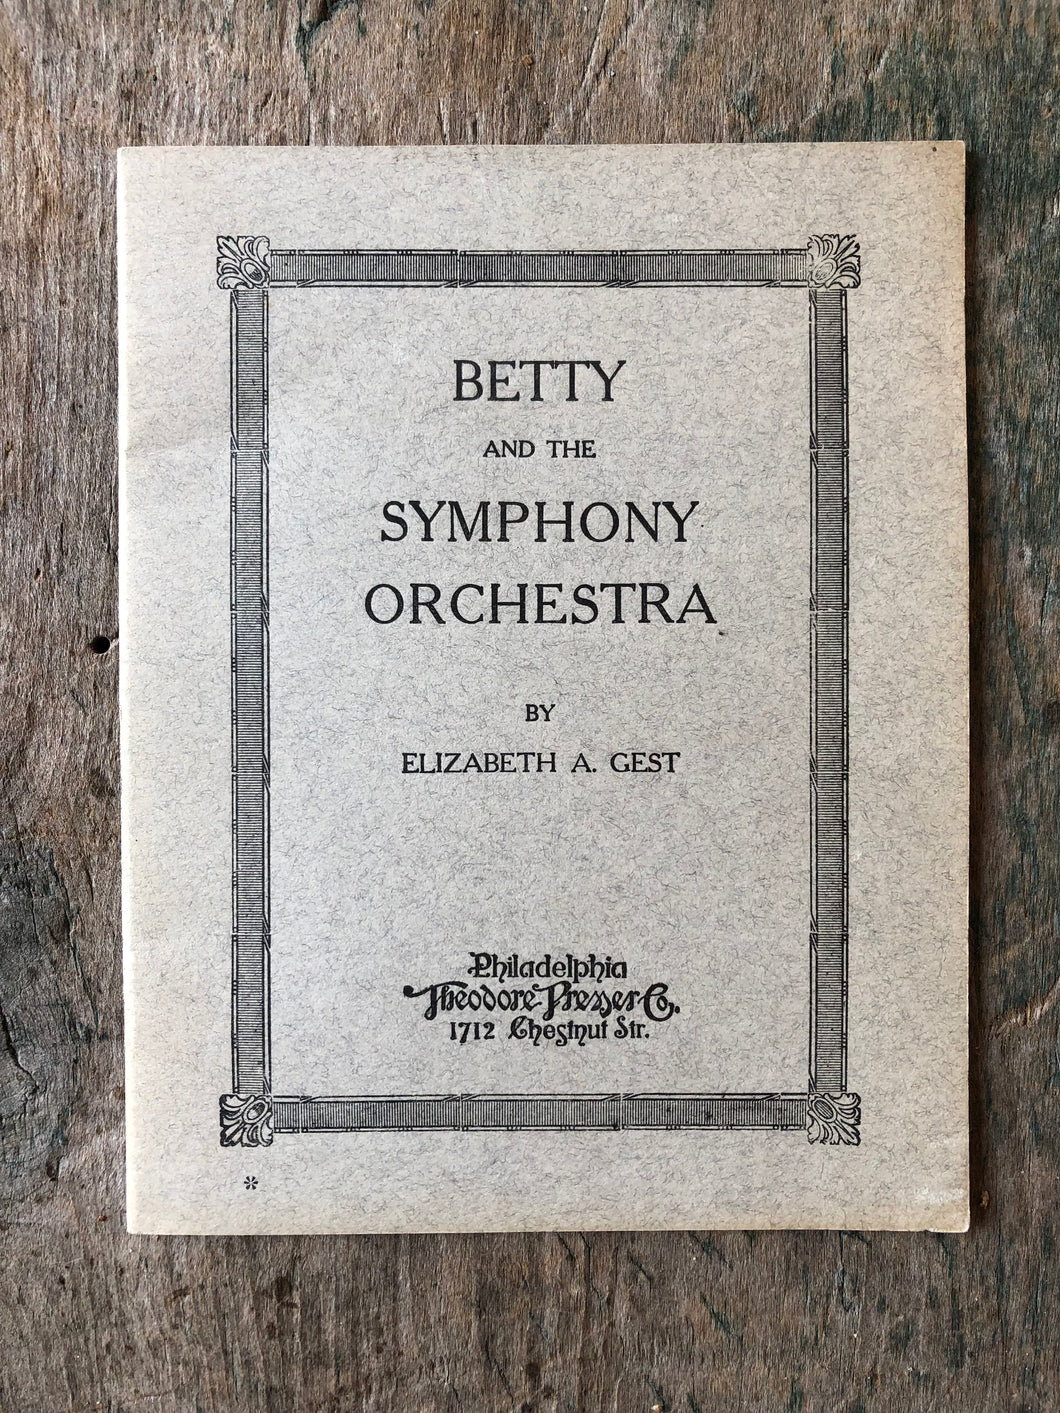 Betty and the Symphony Orchestra by Elizabeth A. Guest